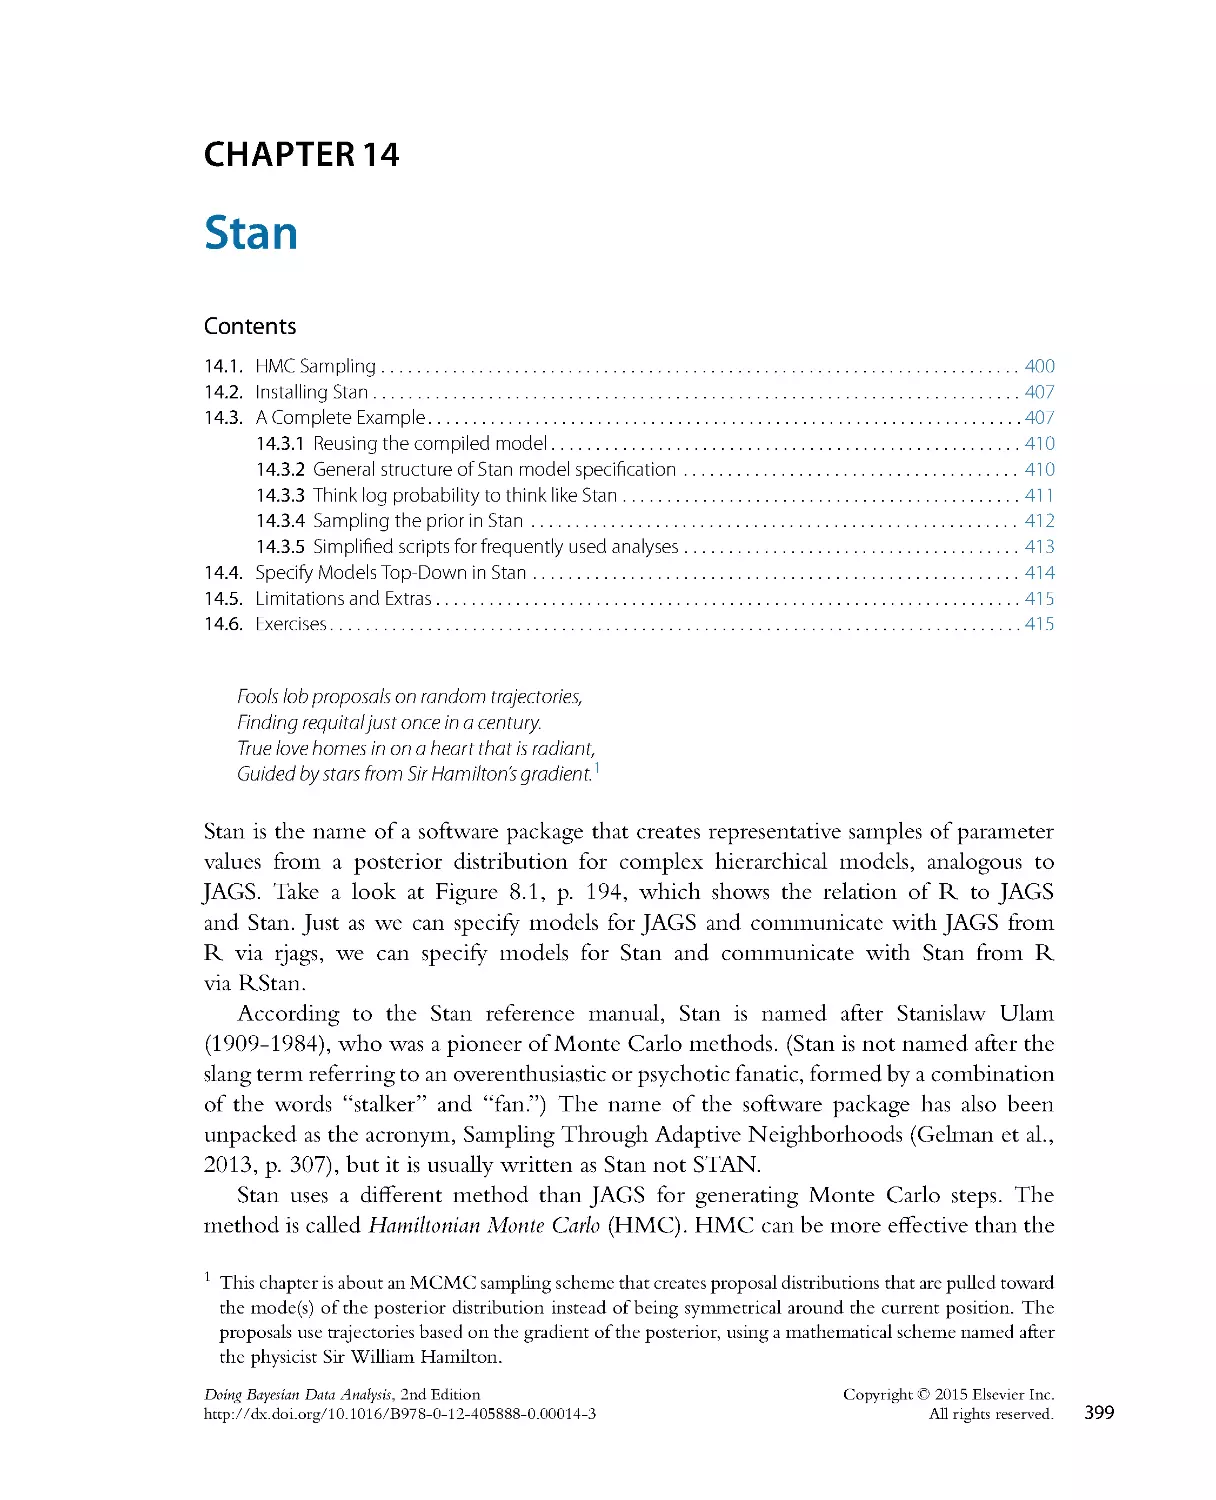 19. Chapter-14-Stan_2015_Doing-Bayesian-Data-Analysis-Second-Edition-